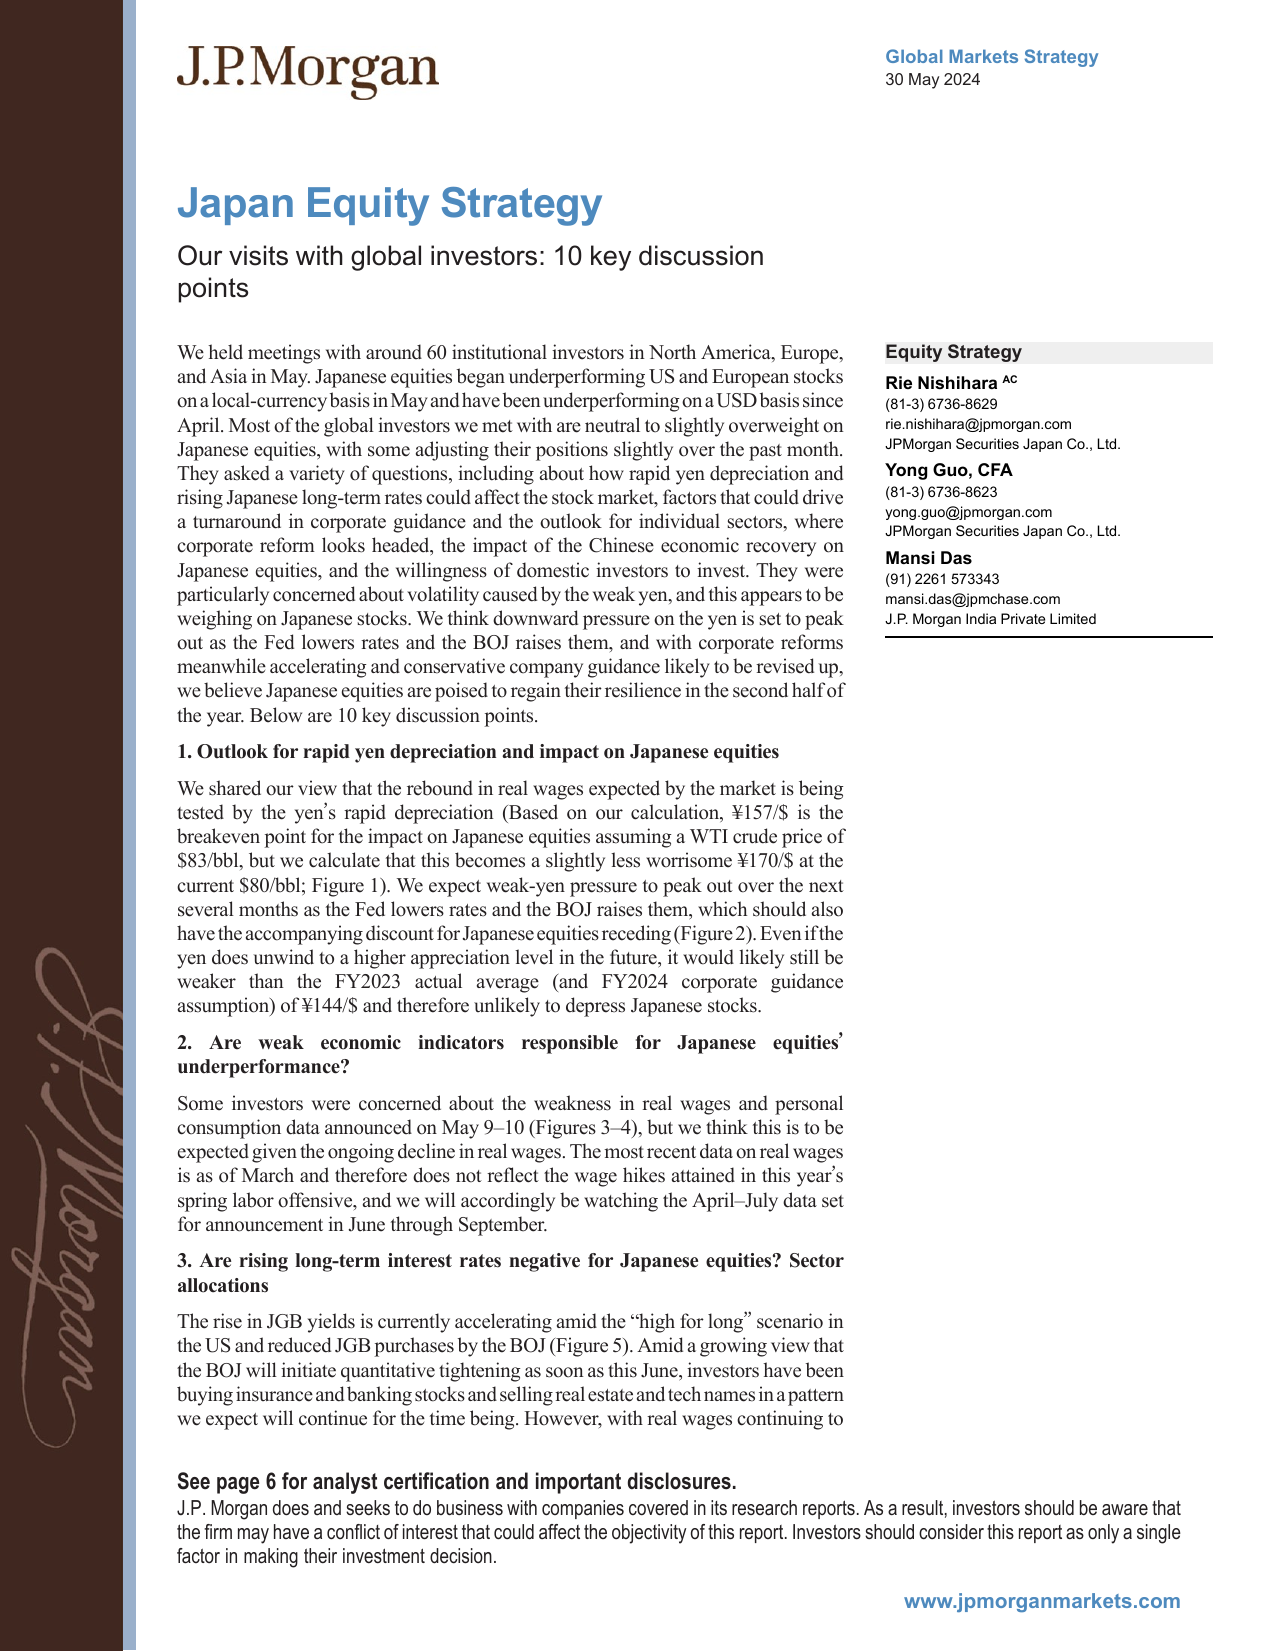 JPMorgan-Japan Equity Strategy Our visits with global investors 10 k...-108460408.pdf